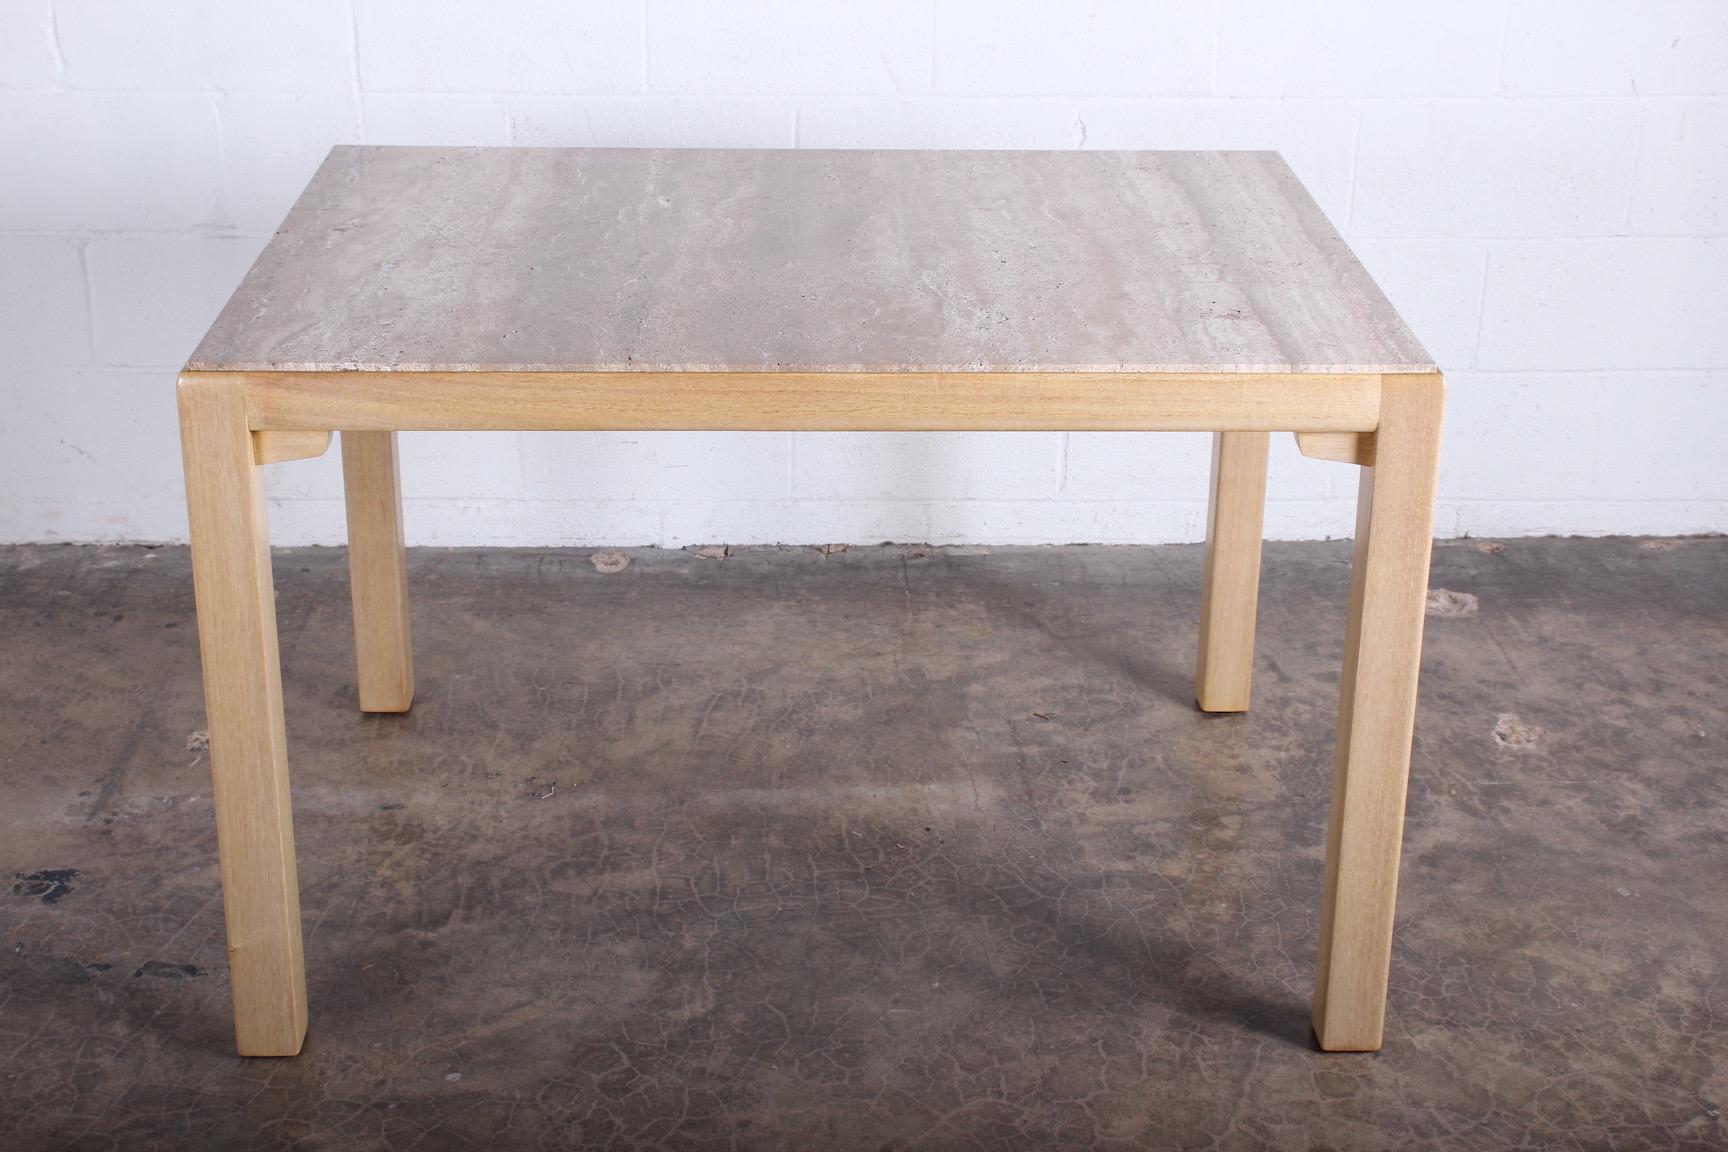 An early bleached mahogany and travertine table / desk designed by Edward Wormley for Dunbar.